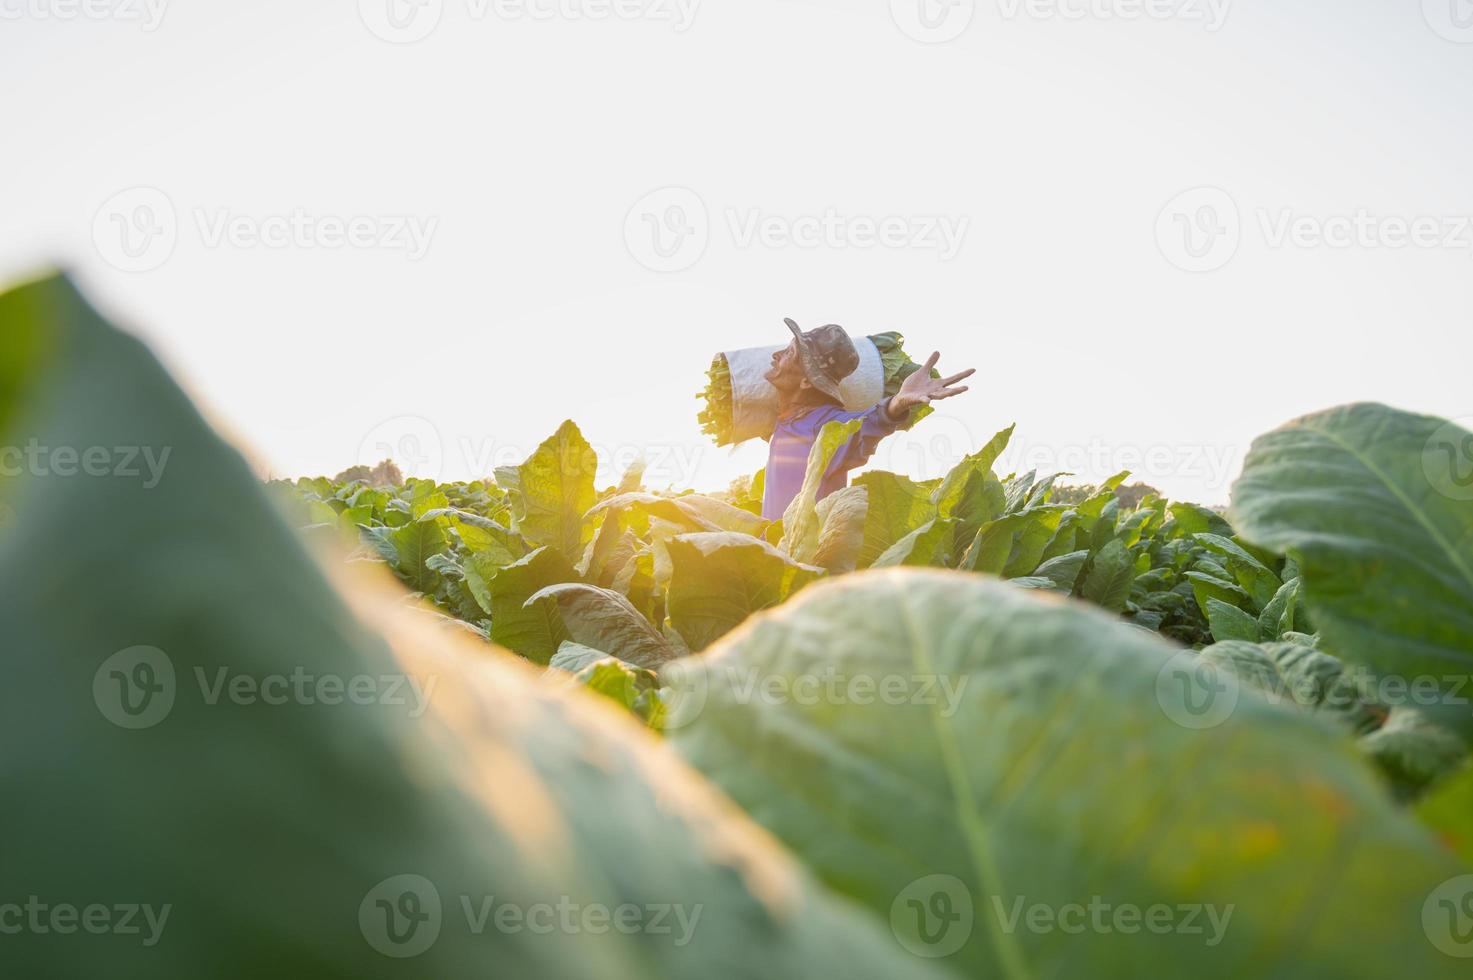 Agriculture harvesting tobacco leaves in the harvest season Senior farmer collects tobacco leaves Farmers are growing tobacco in the tobacco fields growing in Thailand Vietnam photo